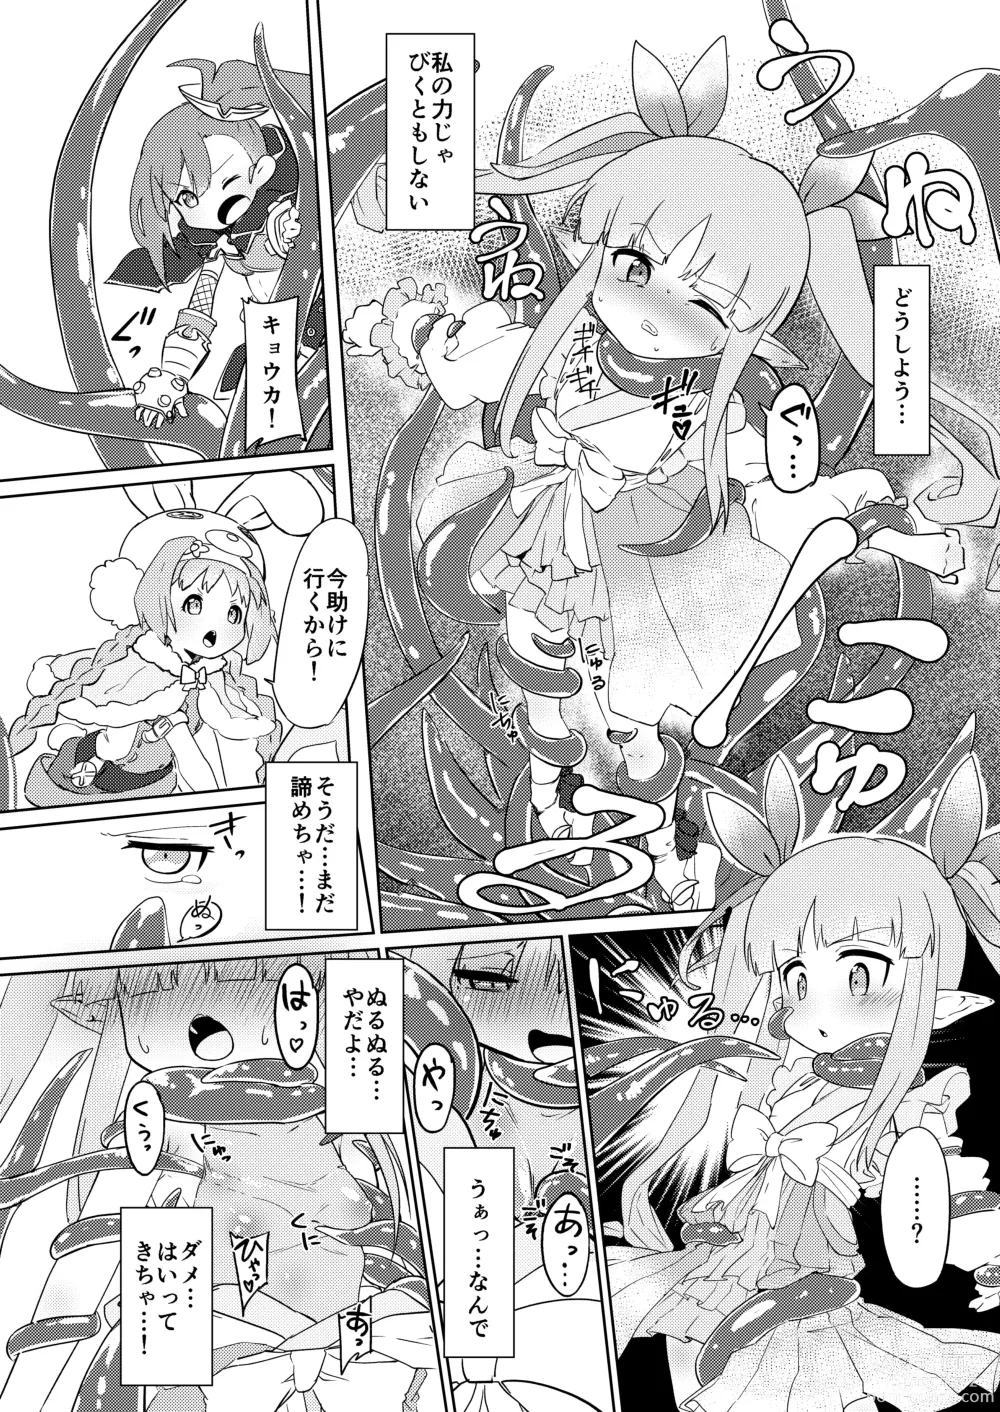 Page 5 of doujinshi Tentacle Defeat Little Lyrical Edition Prototype